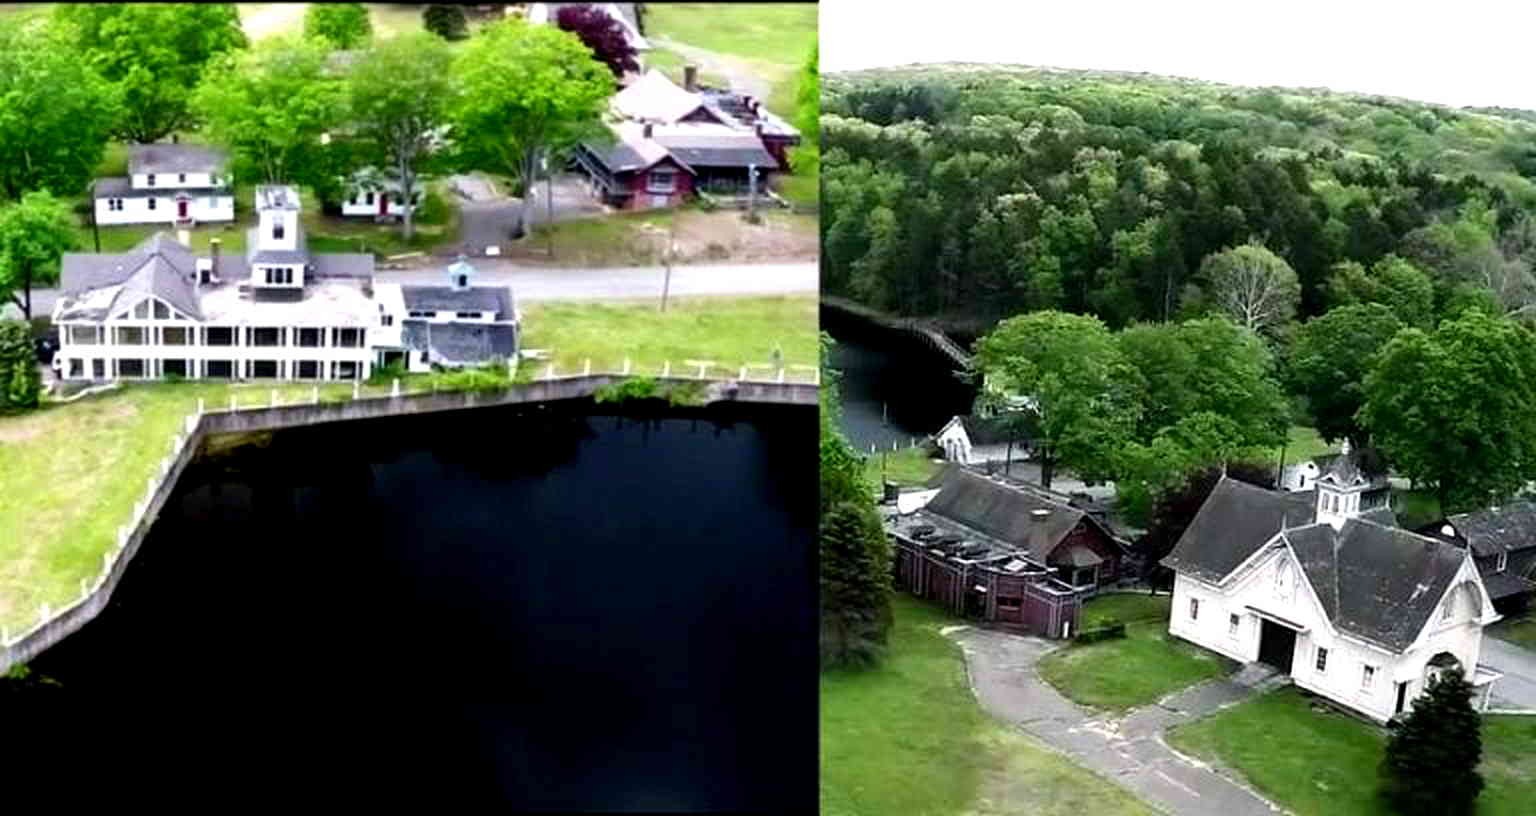 Filipino Megachurch Buys Entire Ghost Town in Connecticut for $1.8 Million